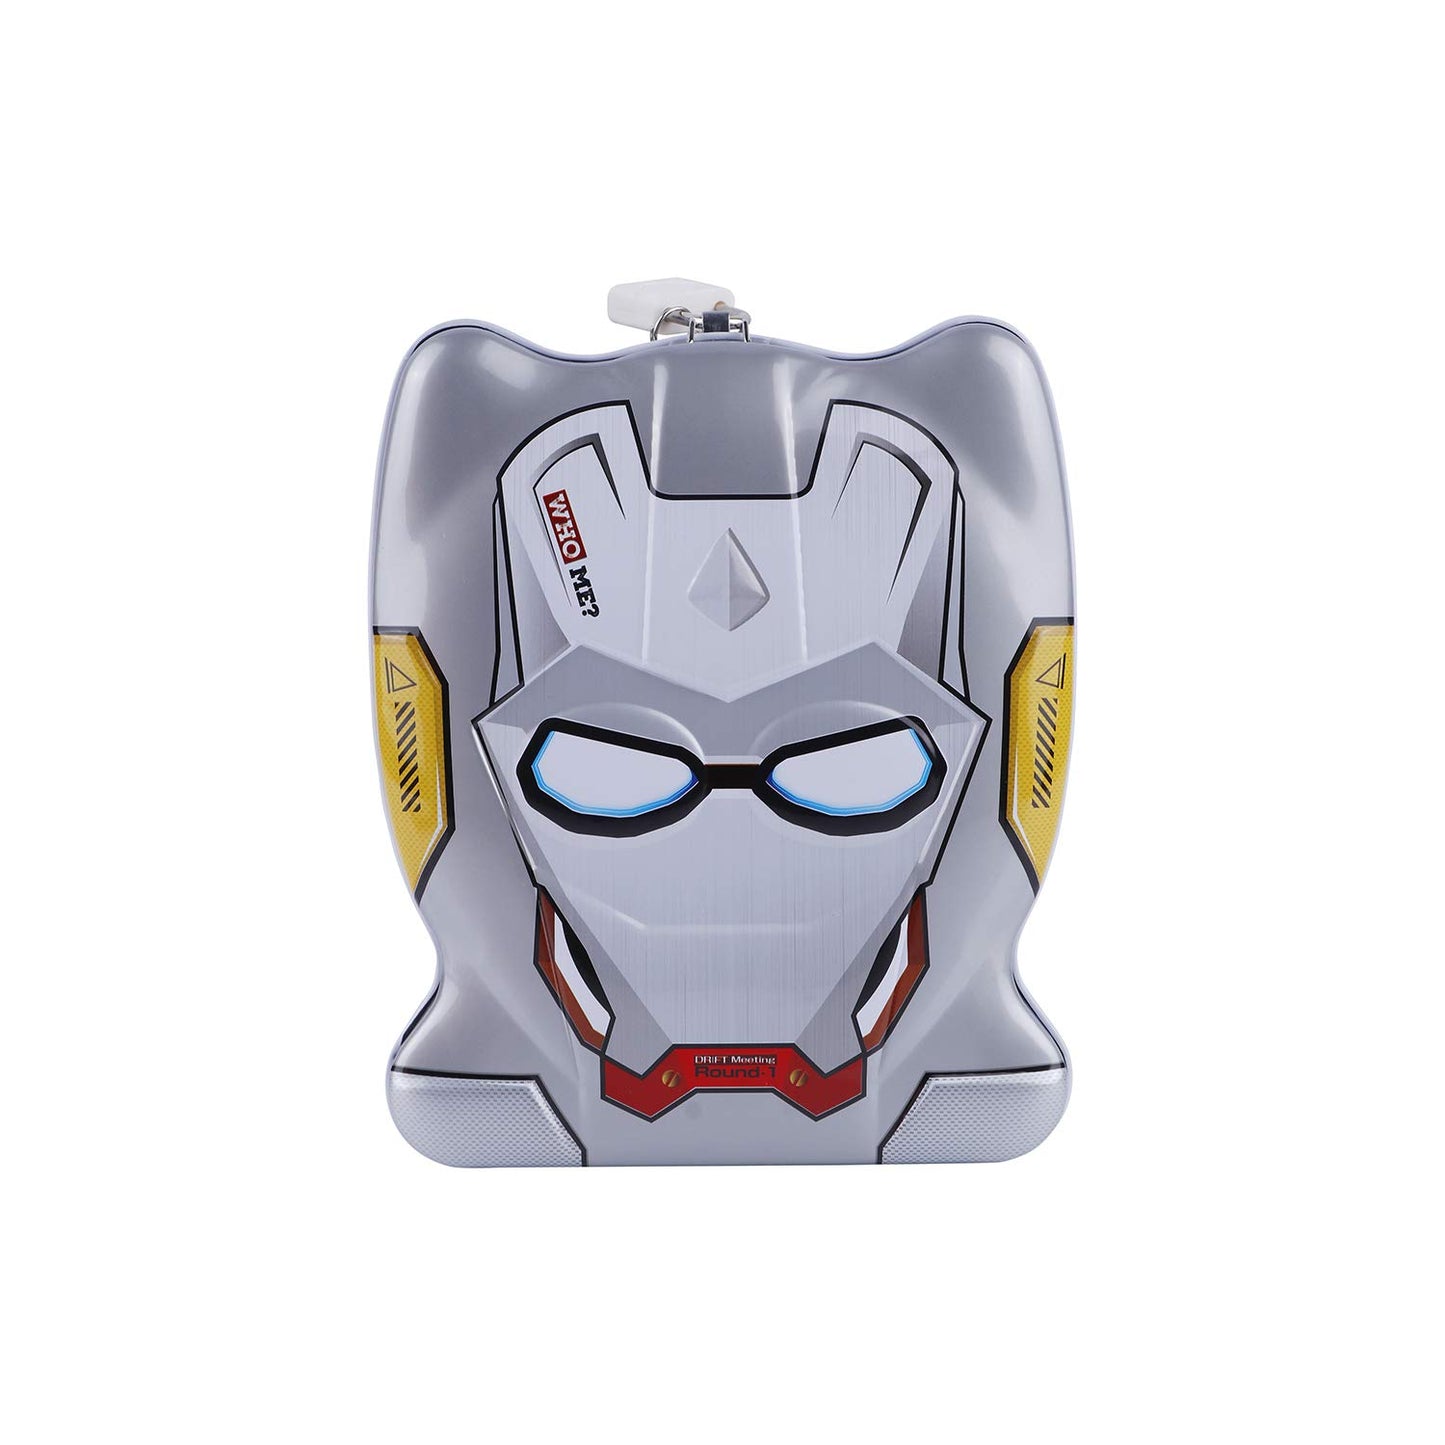 AZi® Superhero Theme Face Shape Money Bank for Kids with Lock and Key Coin Bank Design is WhiteIronMan | Coin Box in Hut Shape